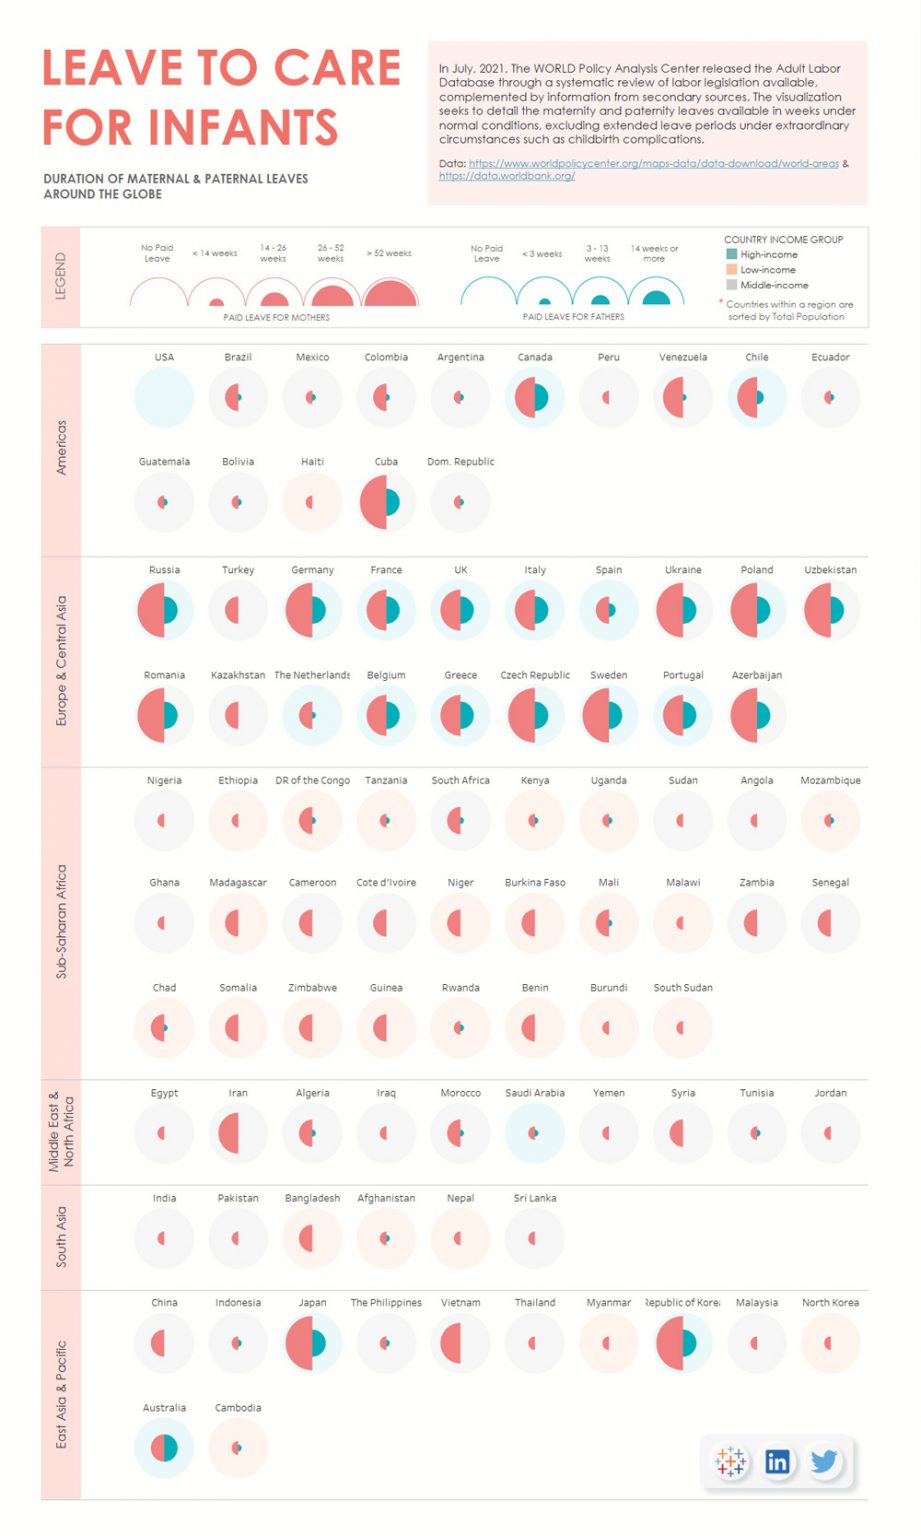 Maternity & Paternity Leave Duration Across the Globe Best Infographics